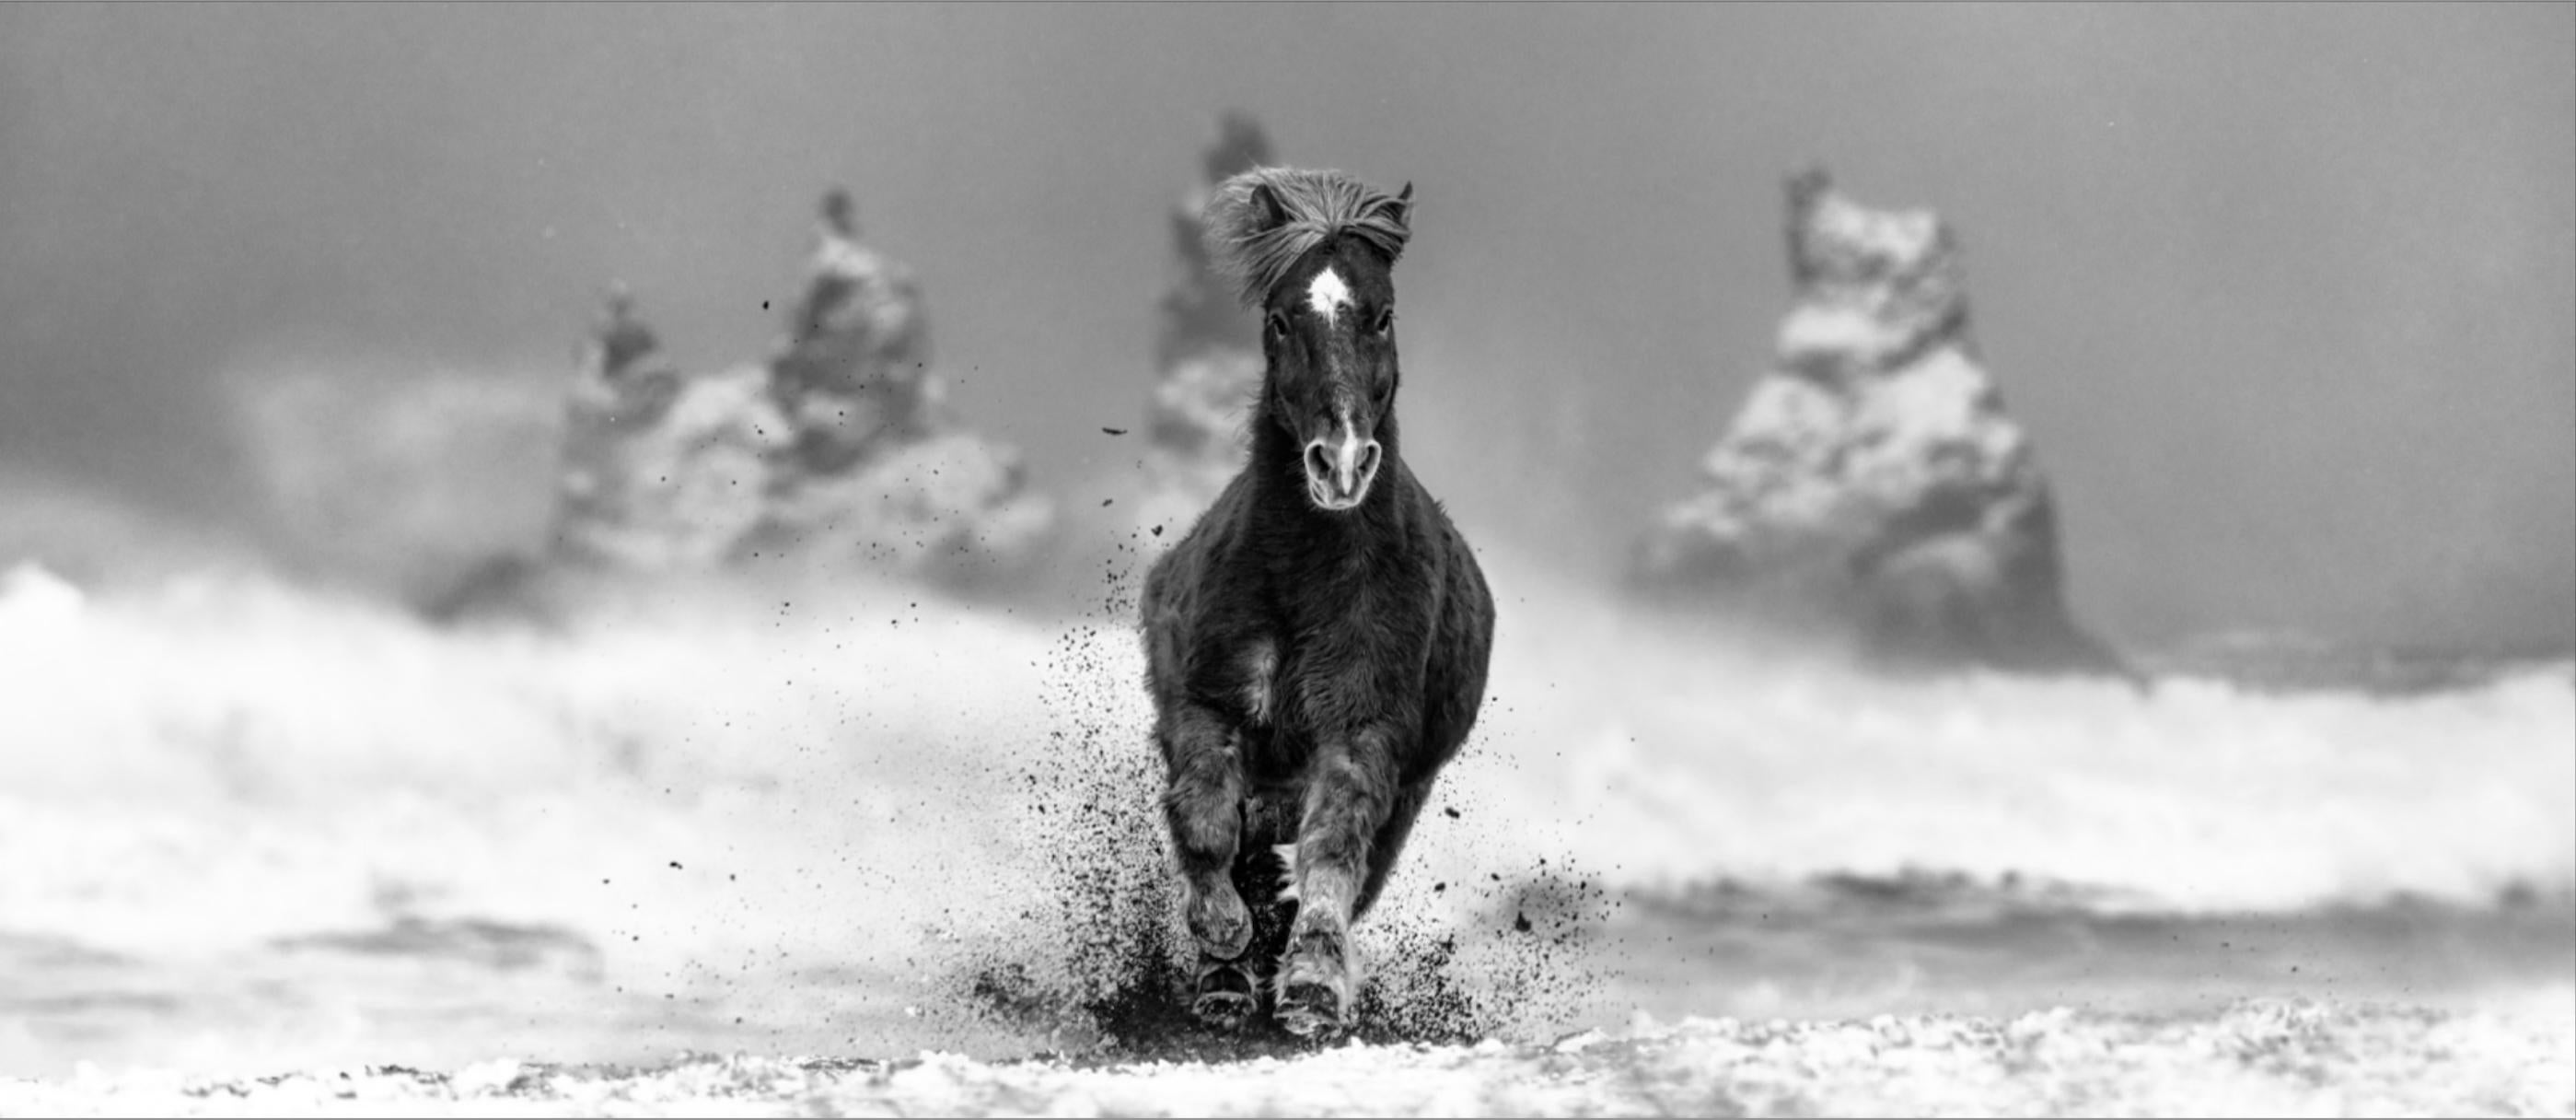 My Perfect Storm - Photograph by David Yarrow